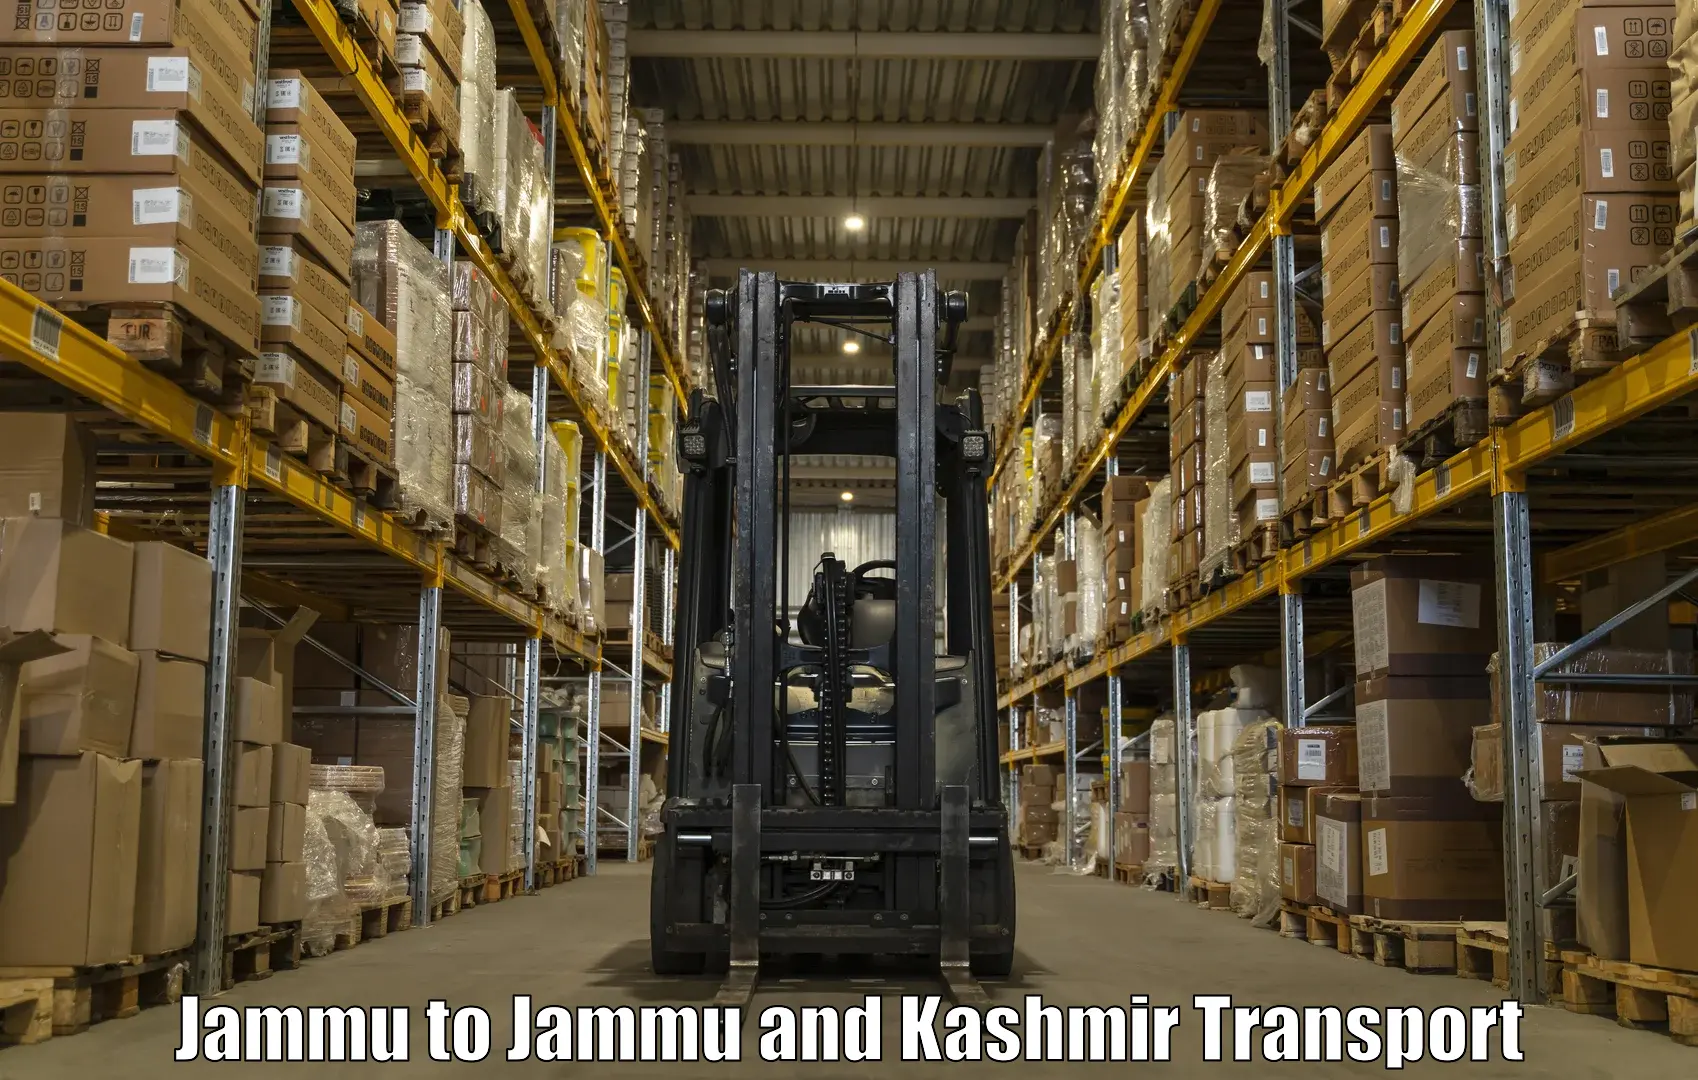 Transport bike from one state to another Jammu to Nagrota